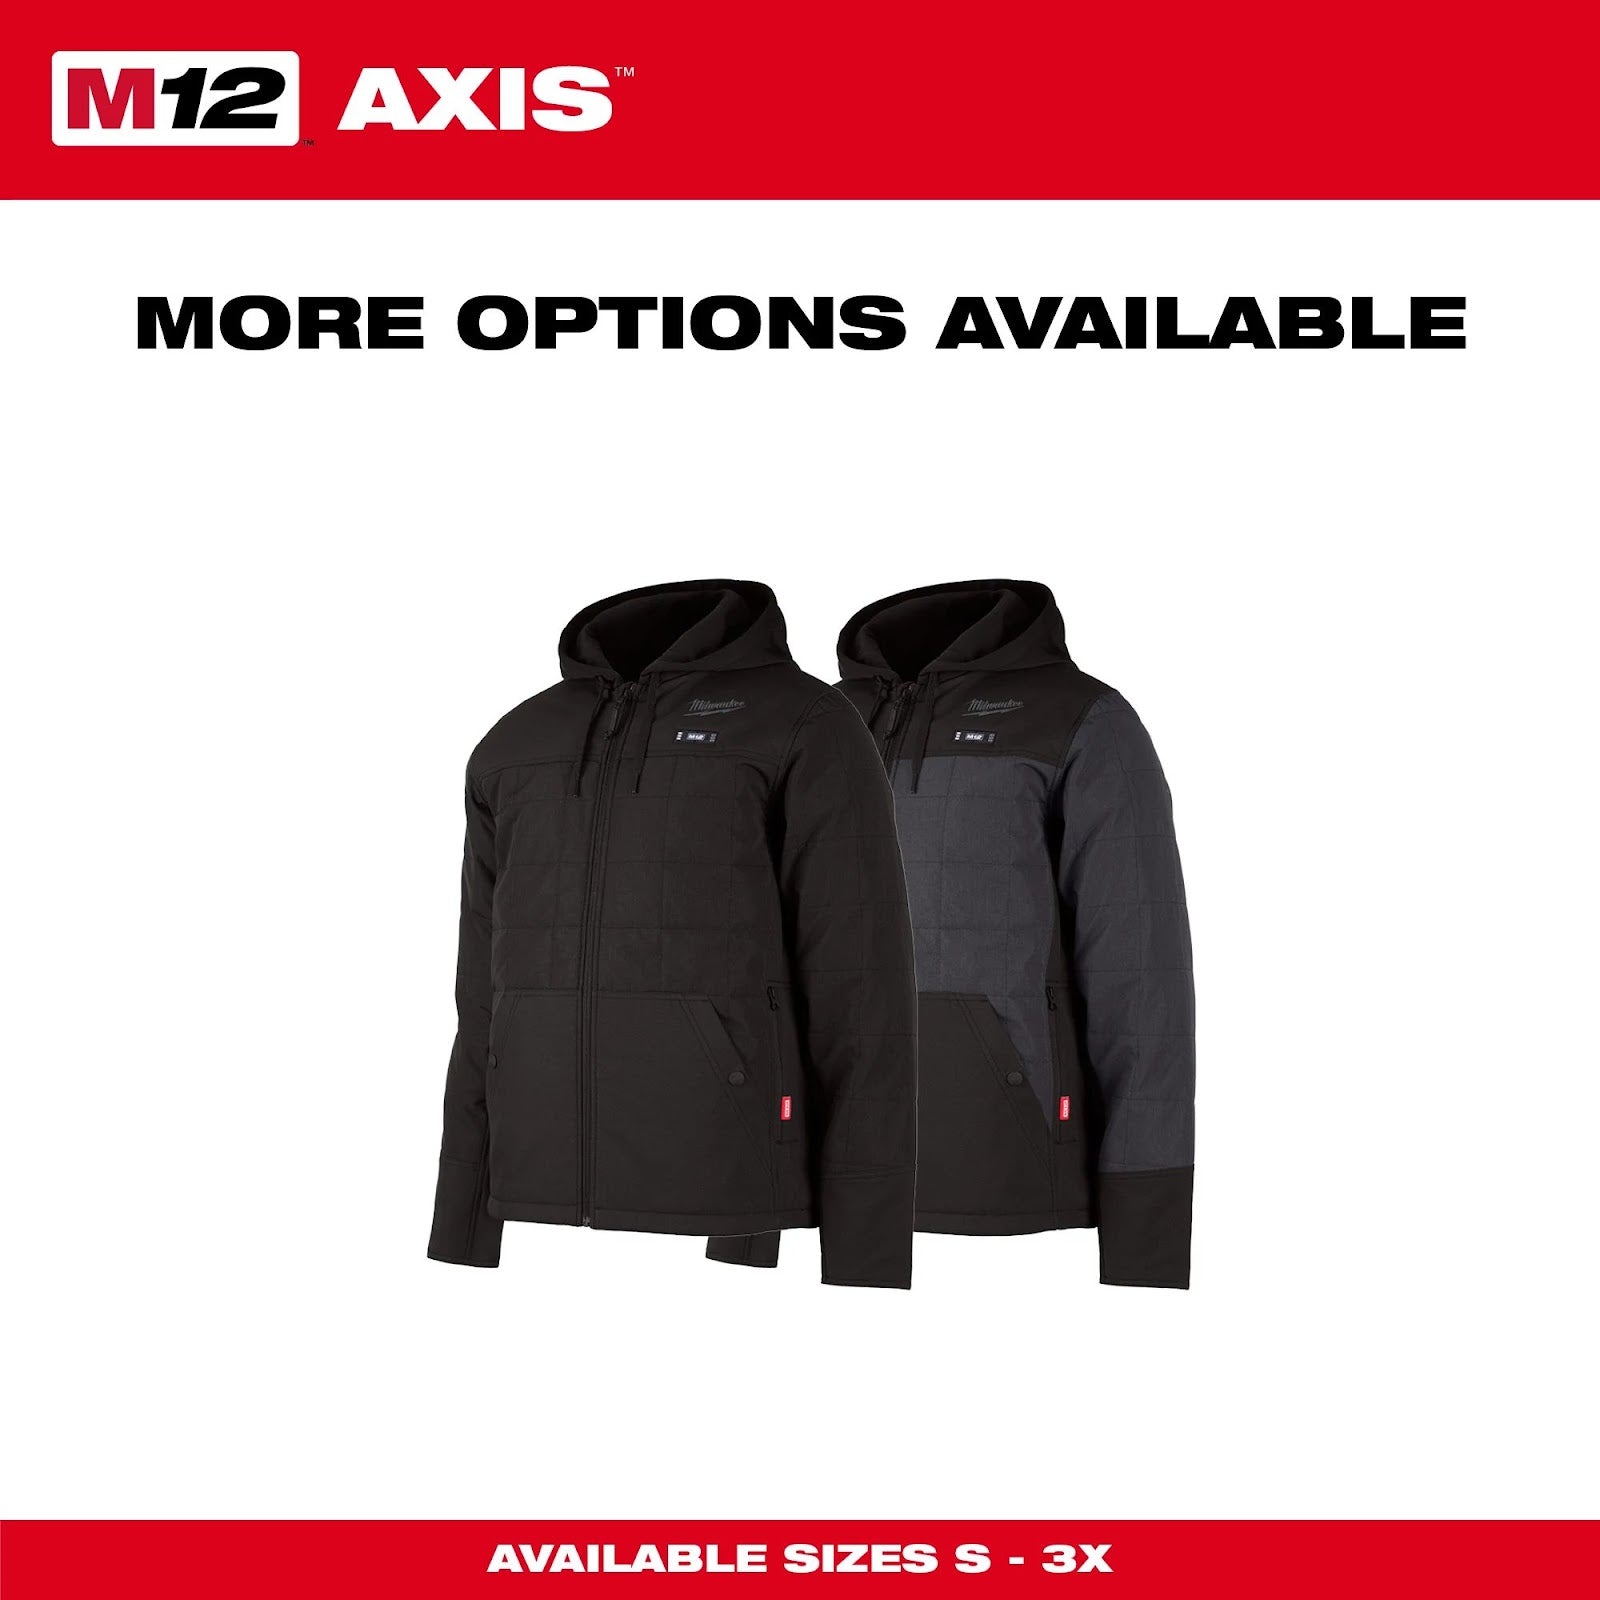 Milwaukee M12 Heated AXIS Jackets with sizes S through 3X